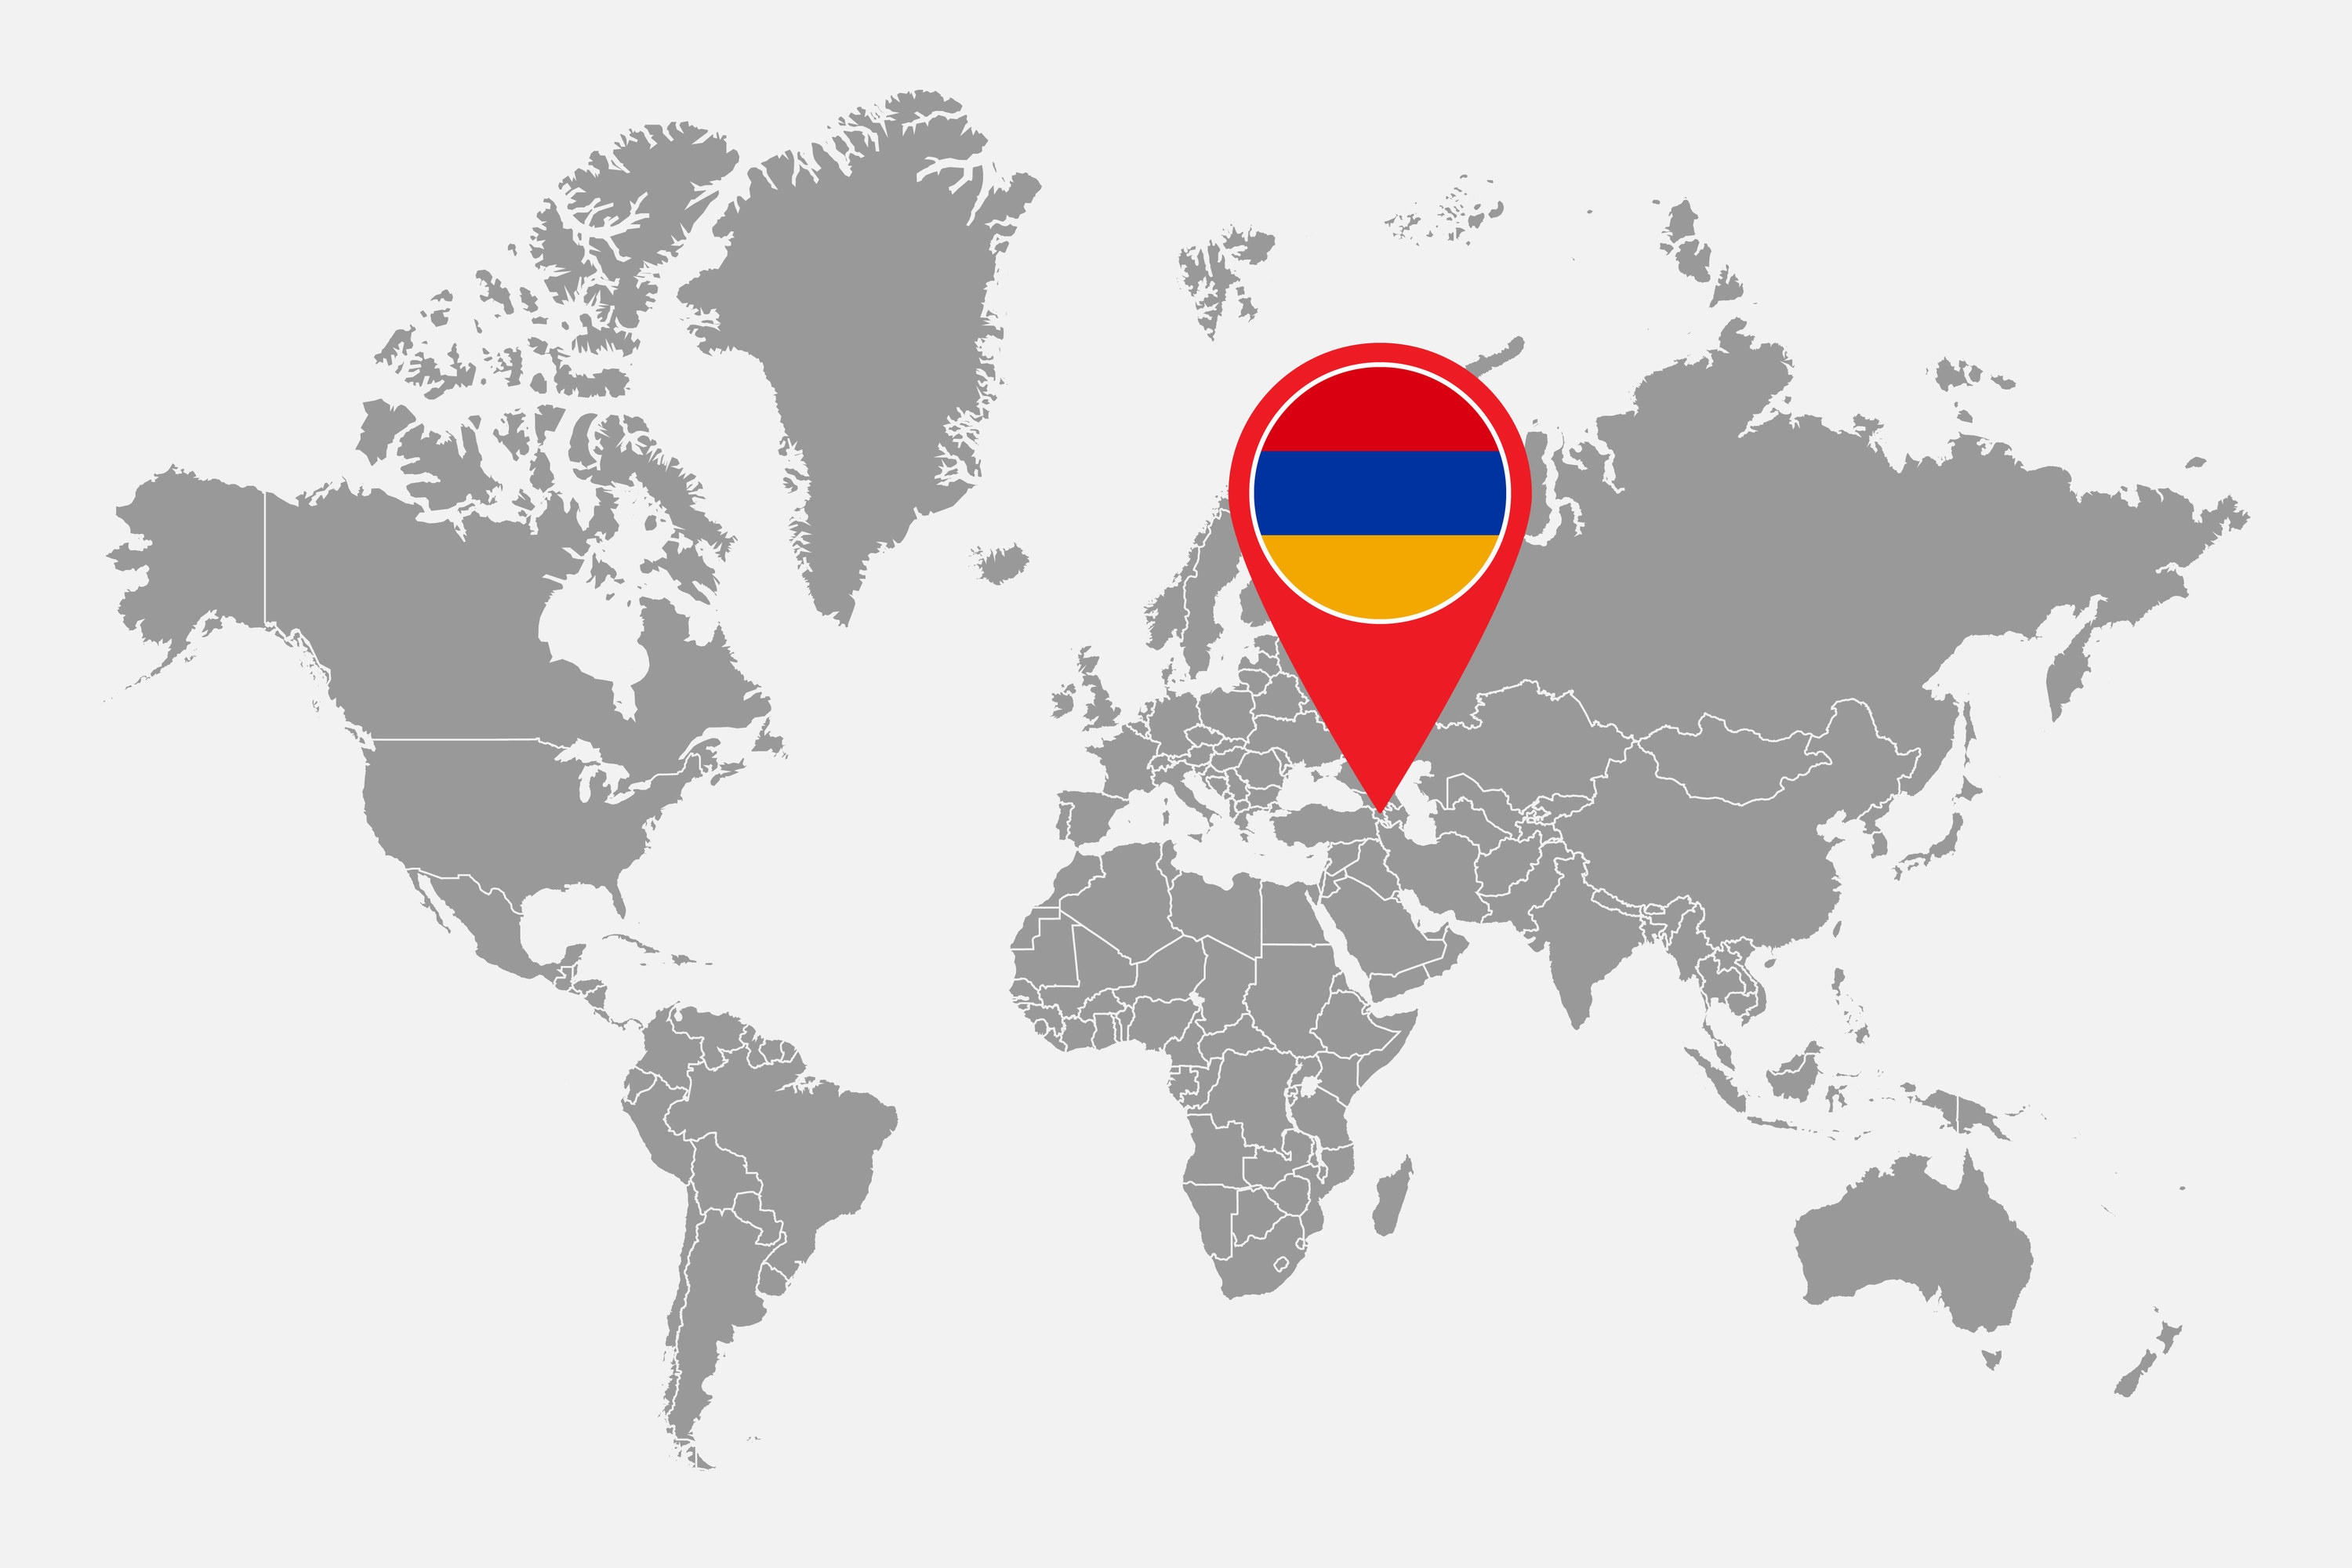 A world map with Armenia indicated